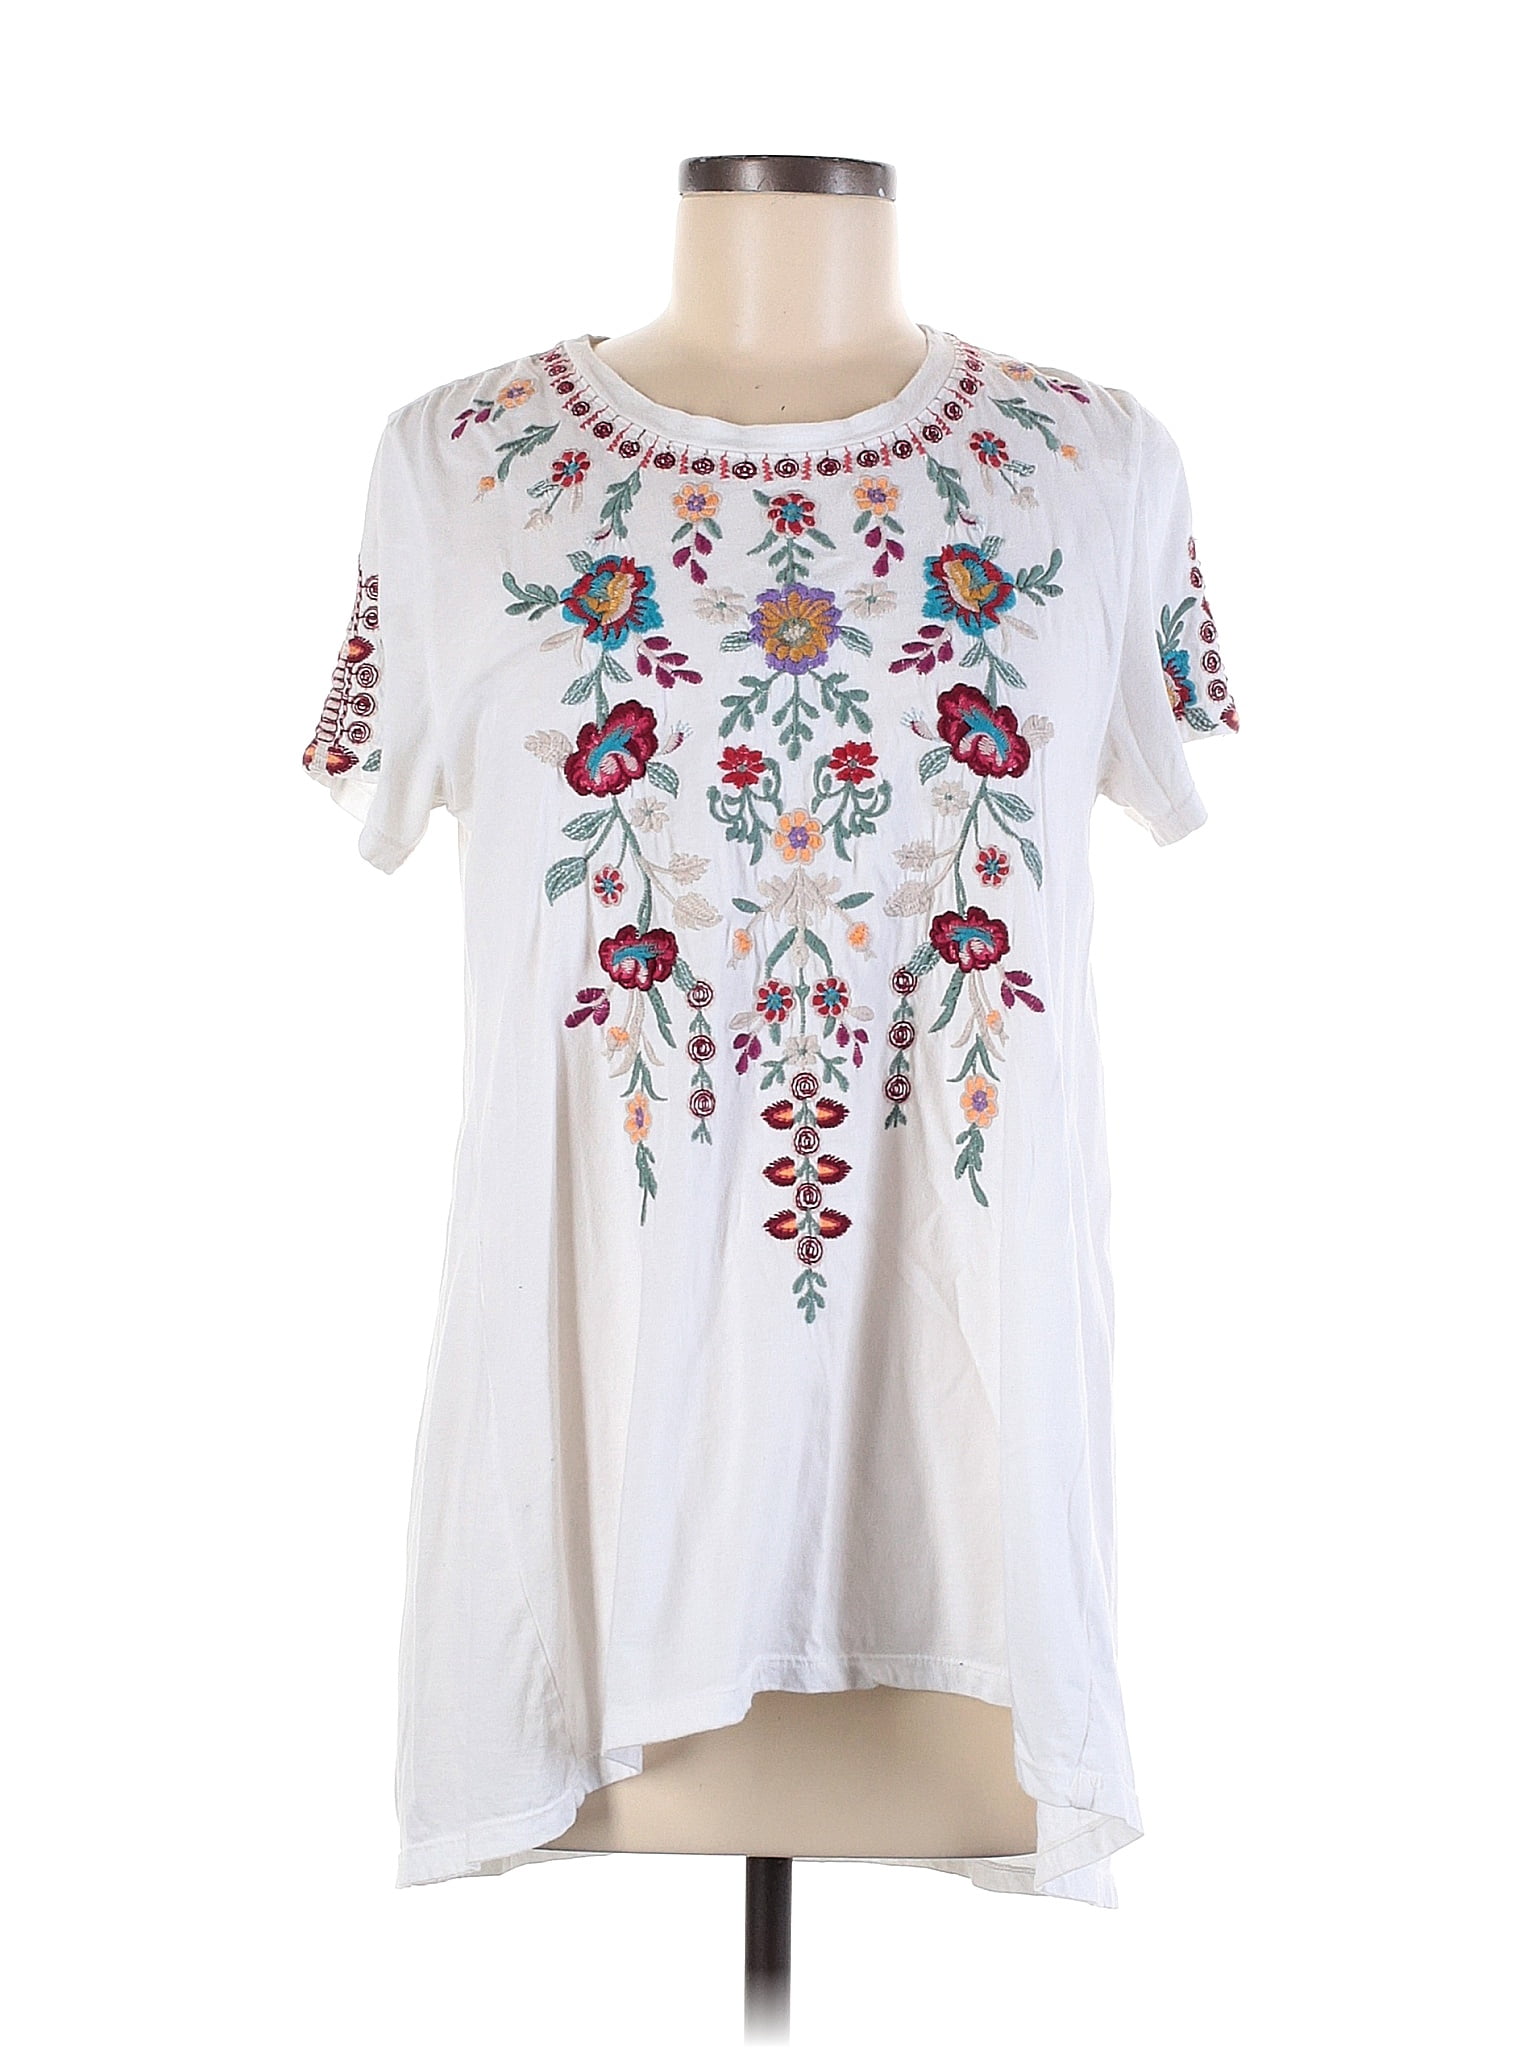 Johnny Was 100% Cotton Floral White Short Sleeve Top Size M - 70% off ...